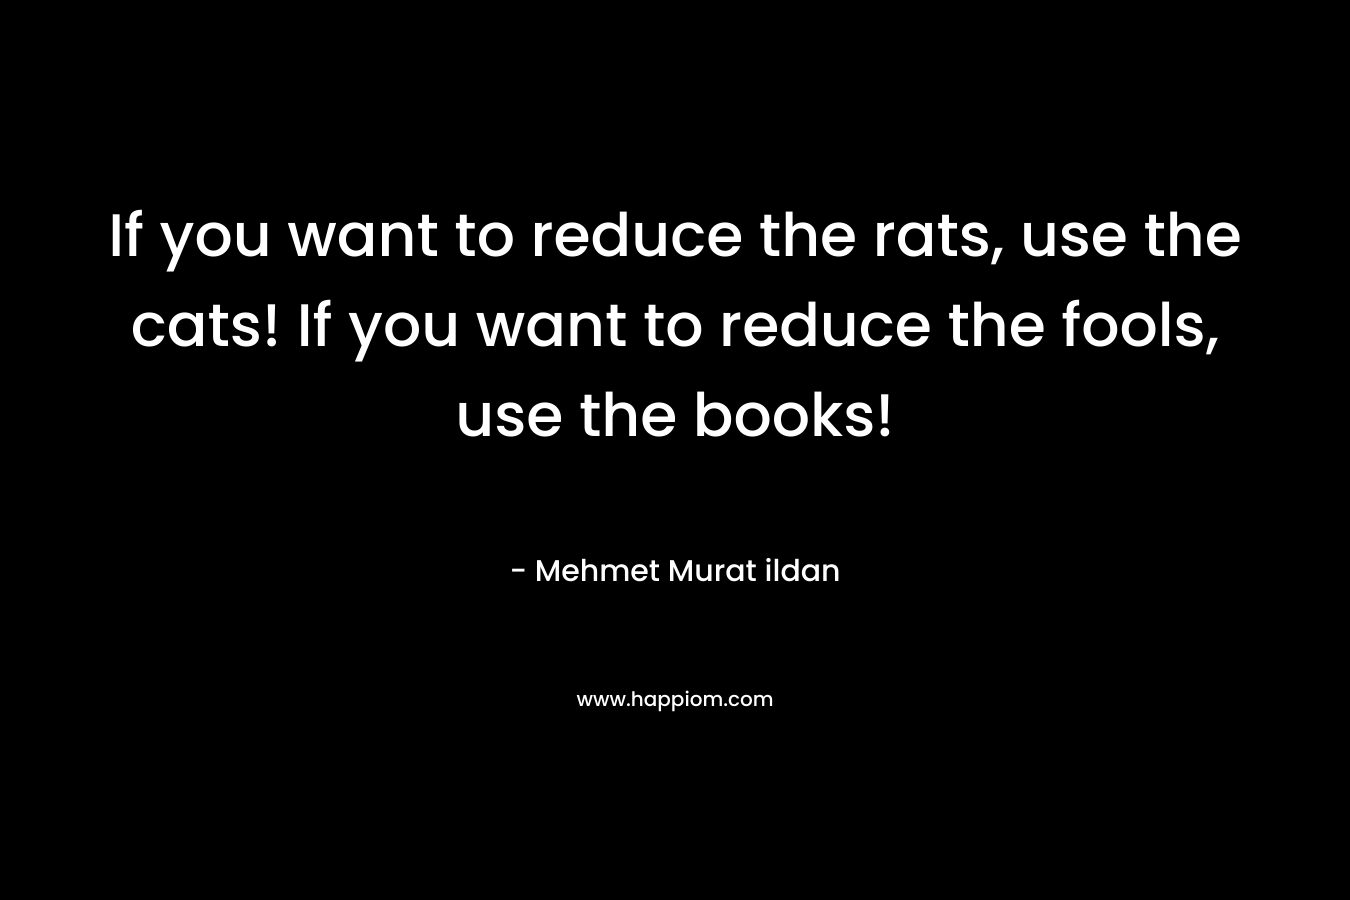 If you want to reduce the rats, use the cats! If you want to reduce the fools, use the books!